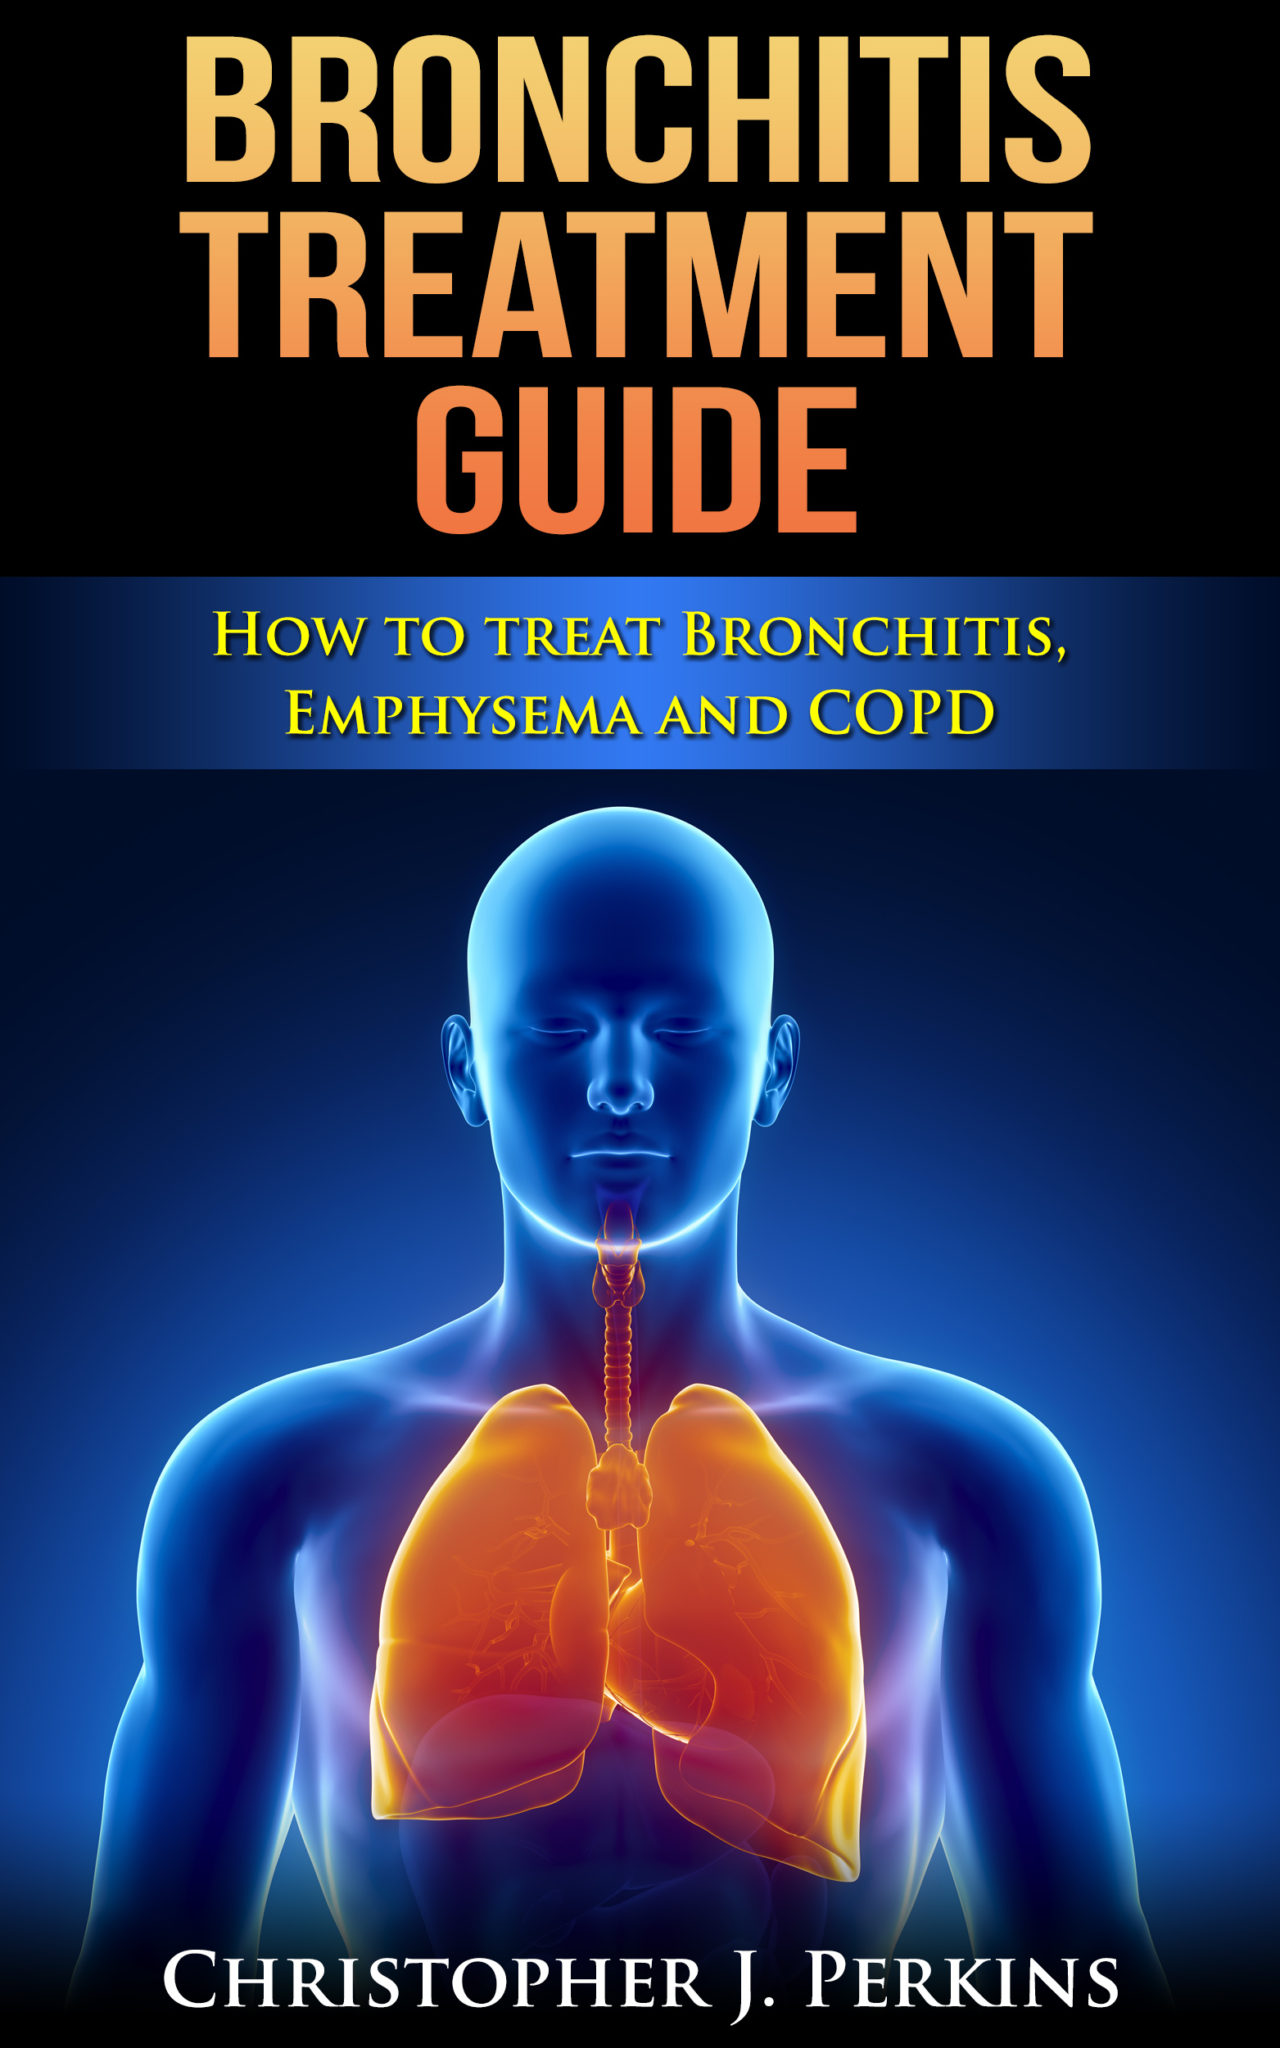 Bronchitis Treatment Guide – How to treat Bronchitis, Emphysema and COPD by Christopher J. Perkins